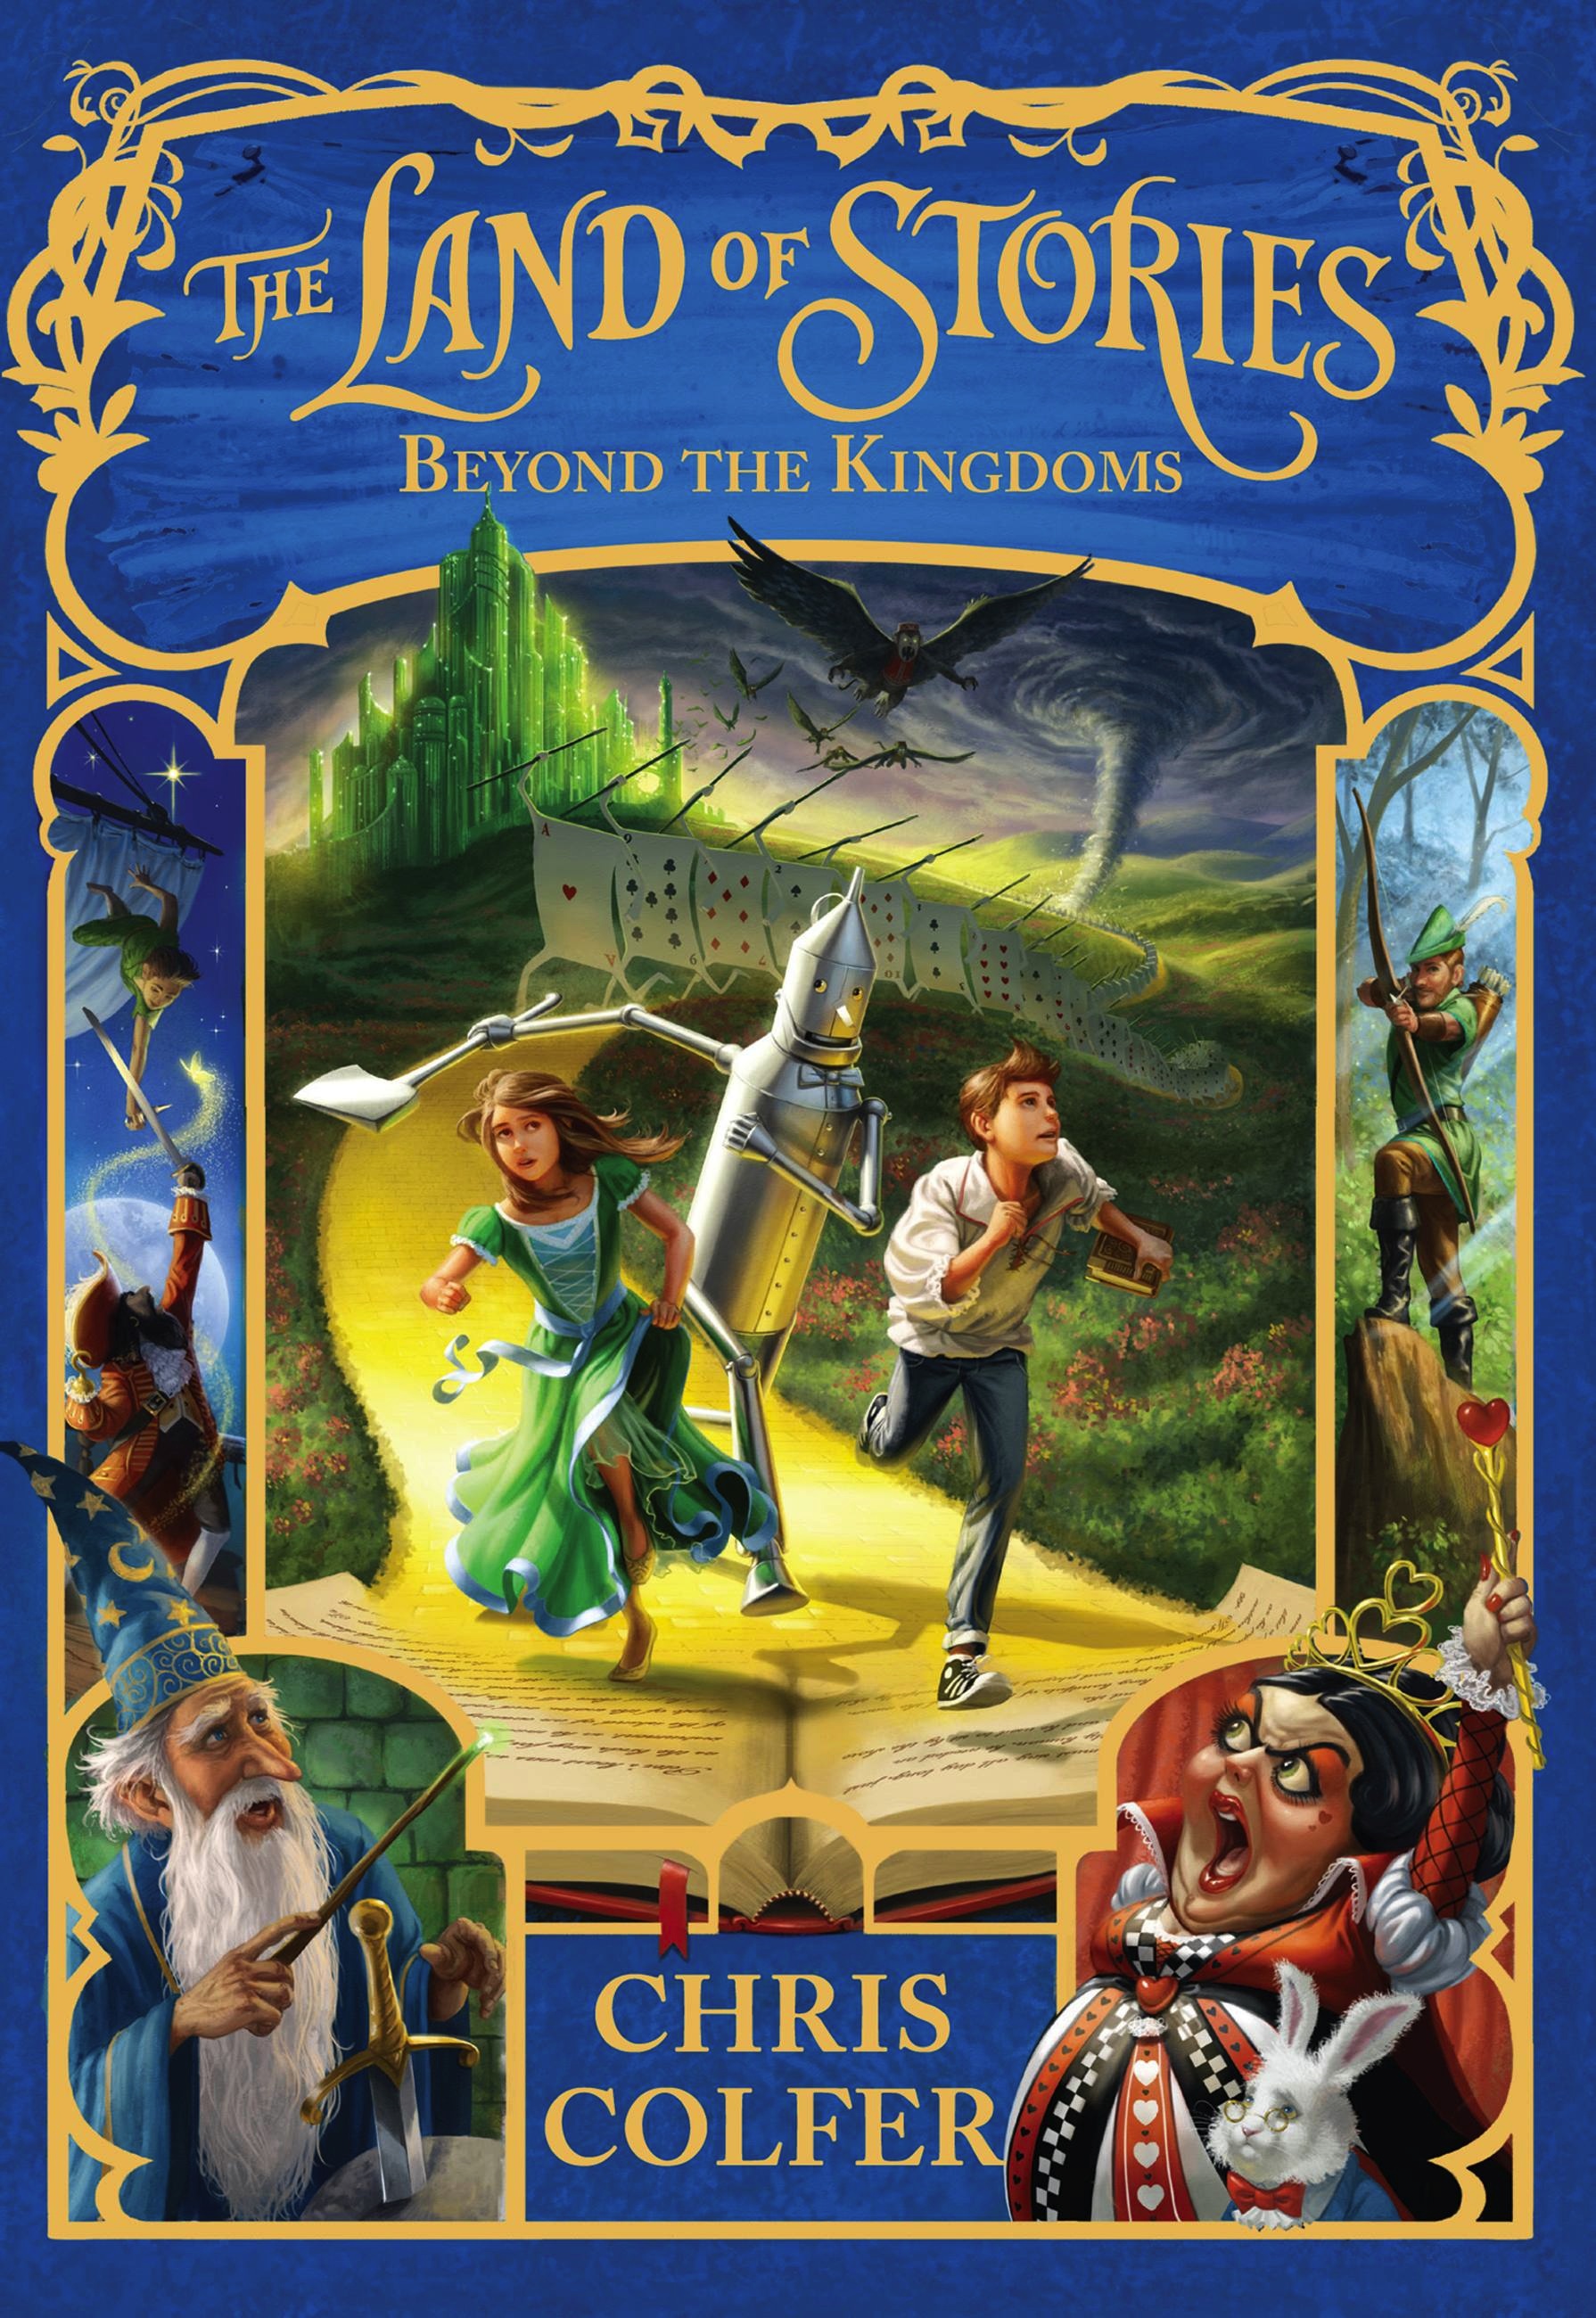 The Land of Stories: Beyond the Kingdoms by Chris Colfer ...